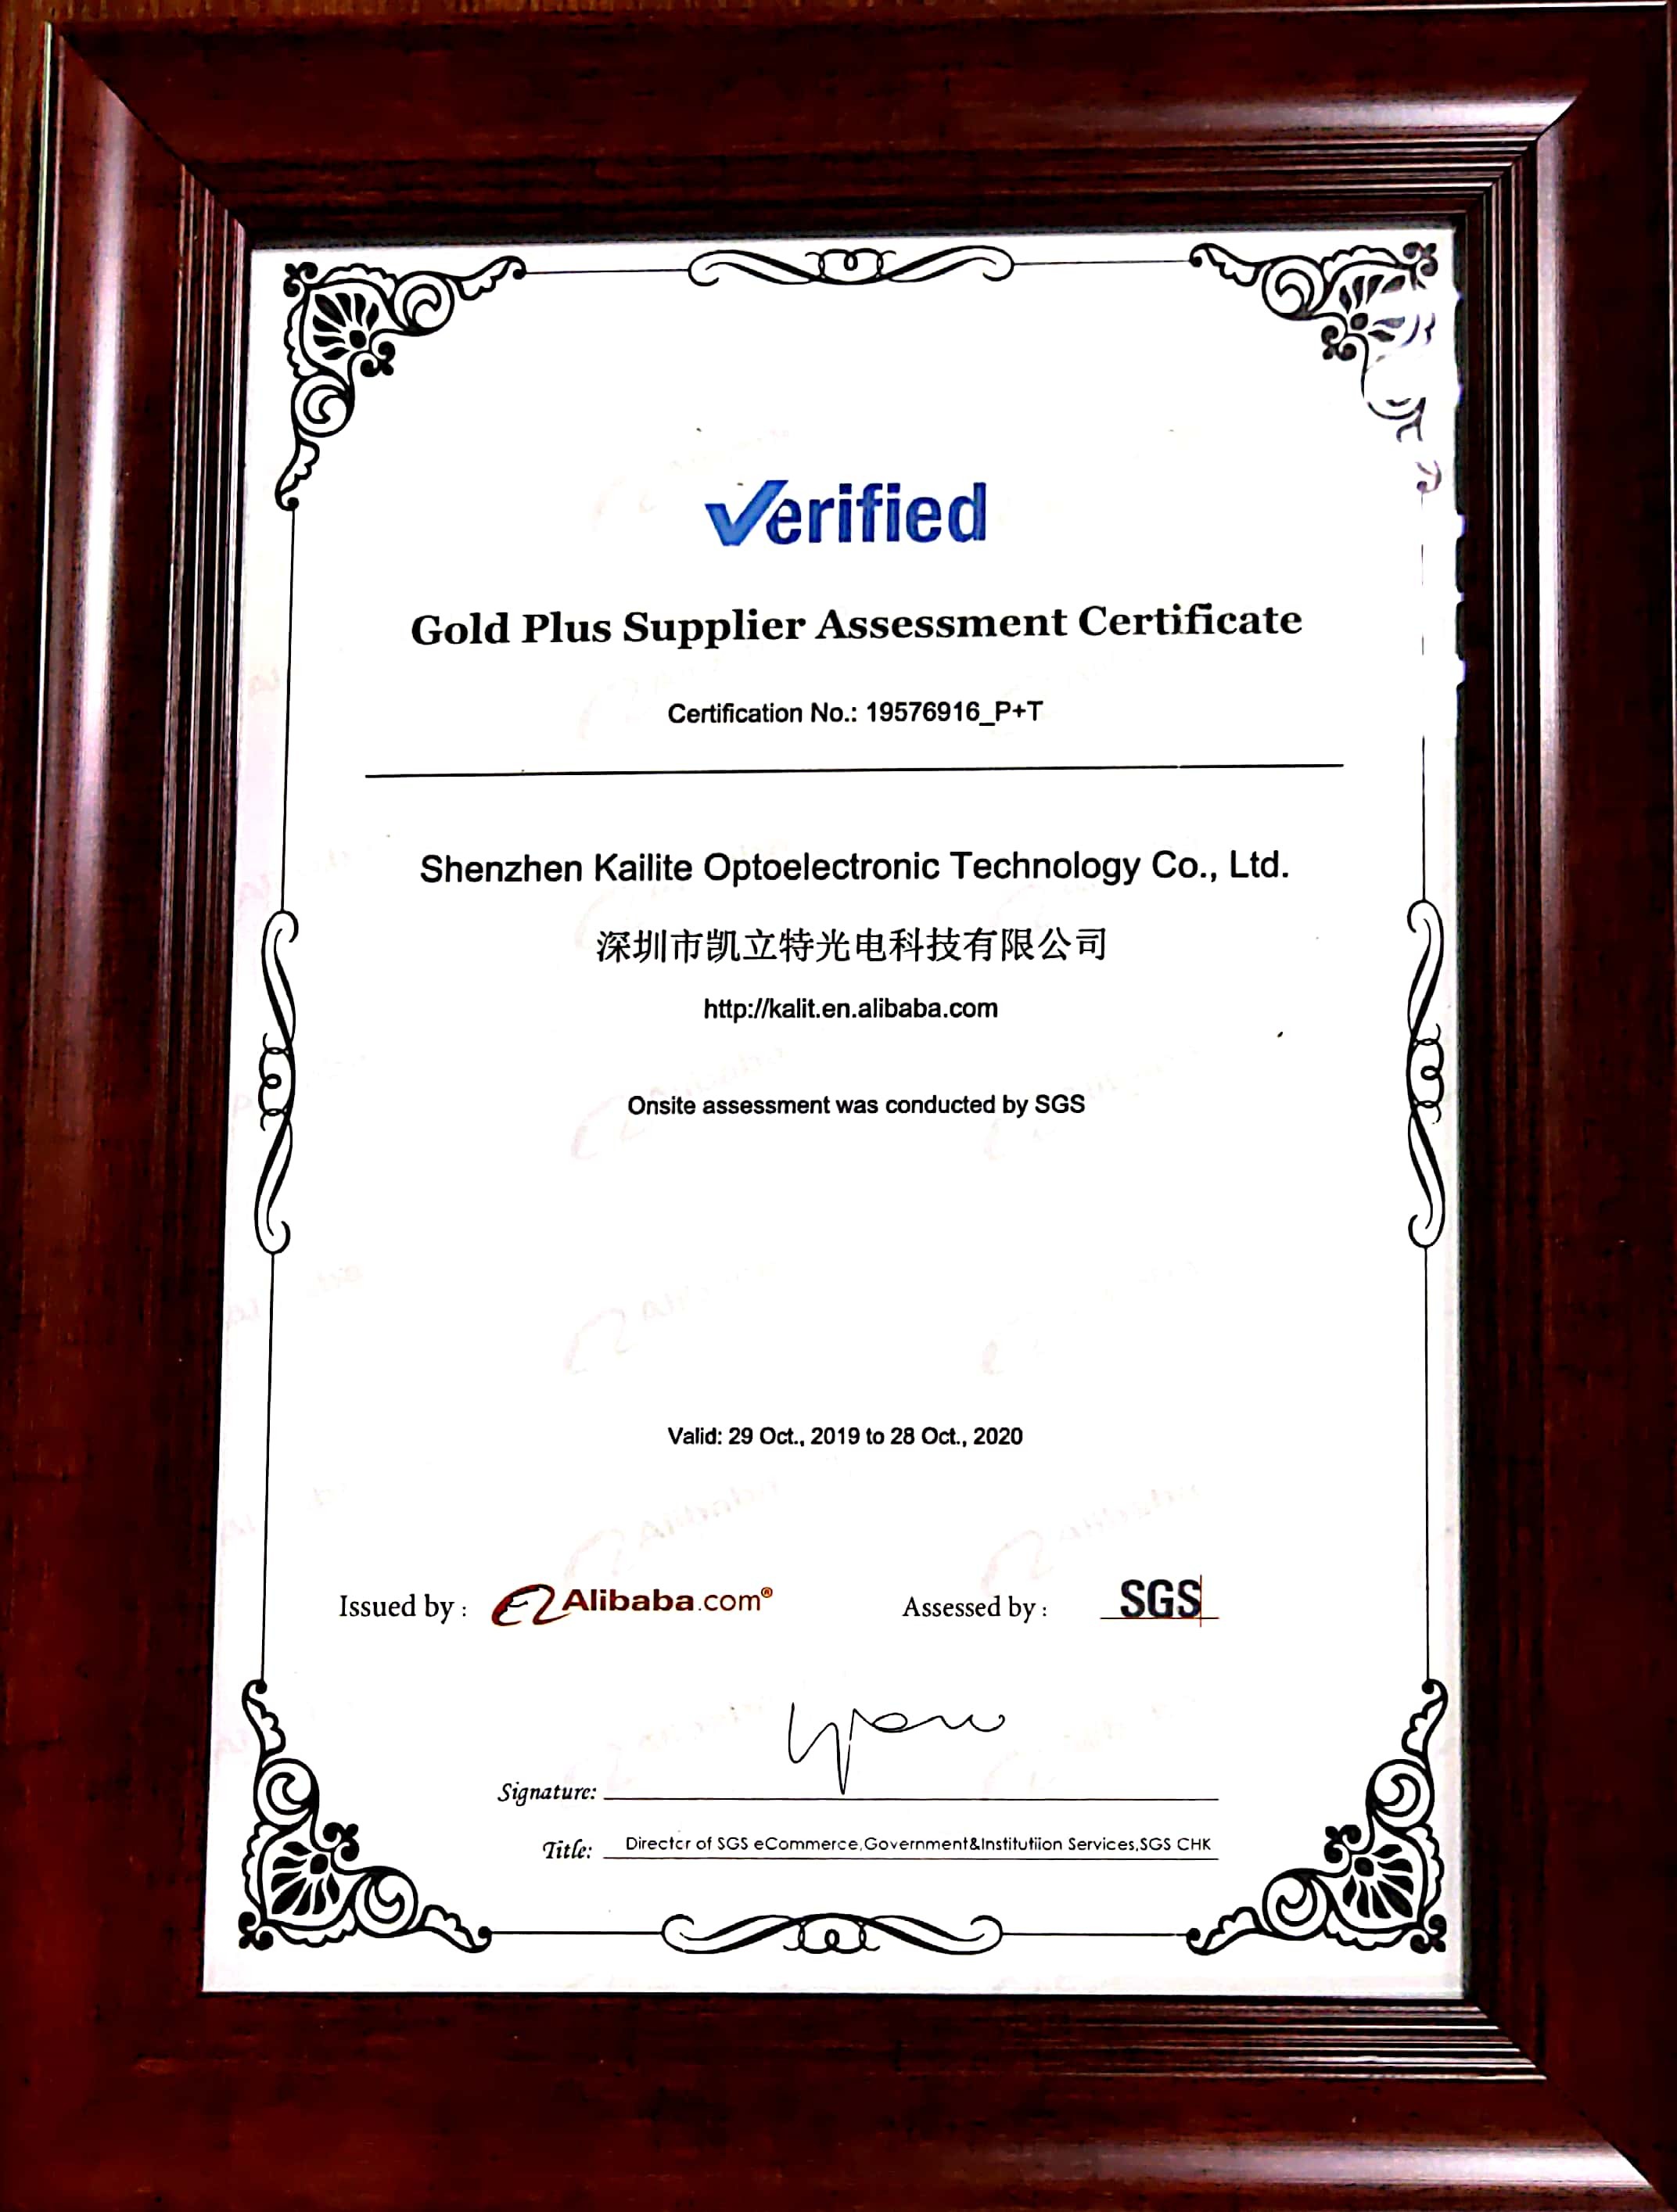 Chine SHENZHEN KAILITE OPTOELECTRONIC TECHNOLOGY CO., LTD Certifications